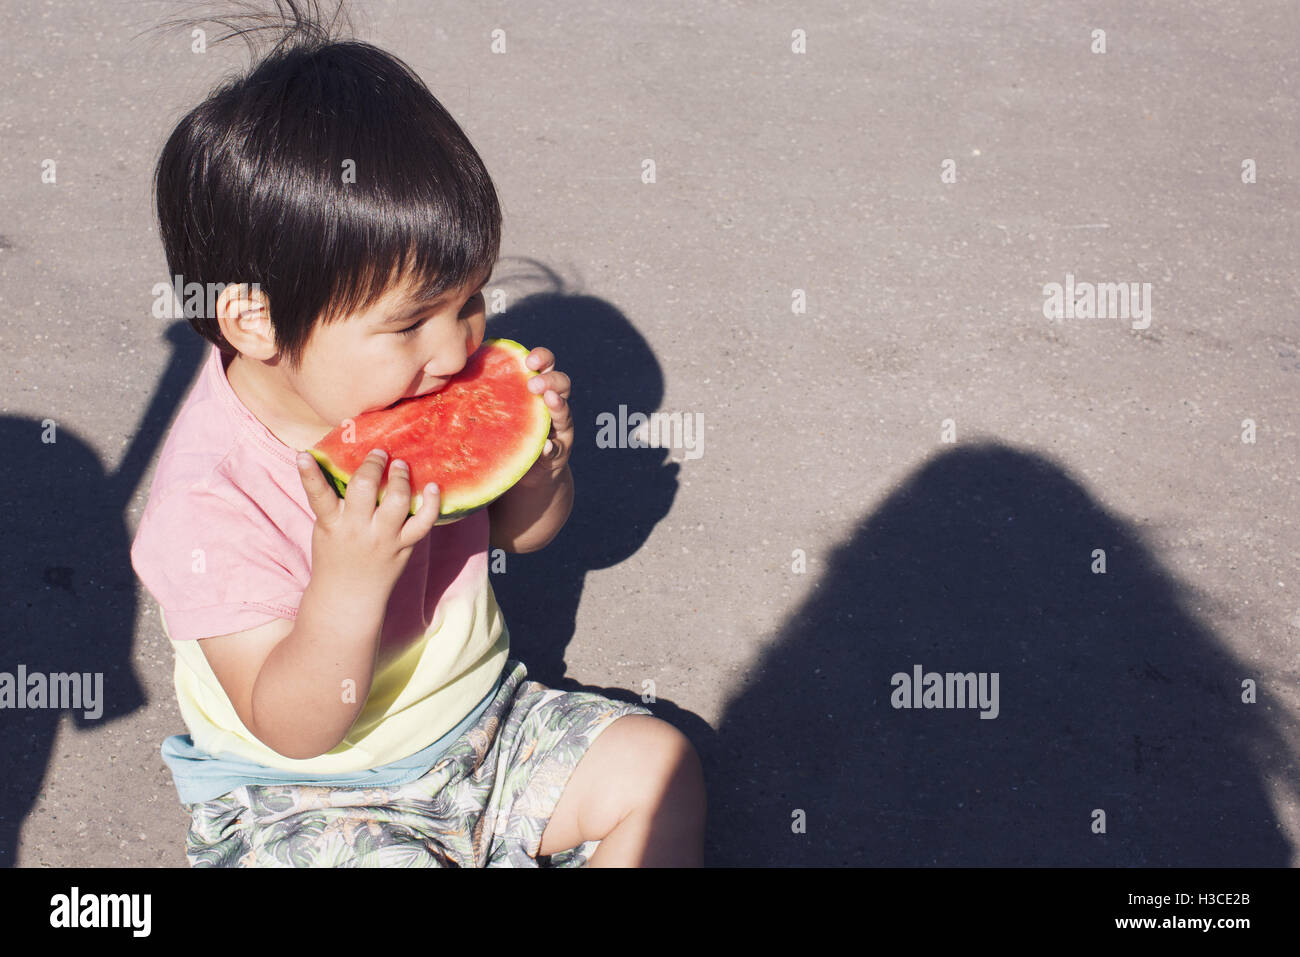 Little boy eating watermelon outdoors Stock Photo